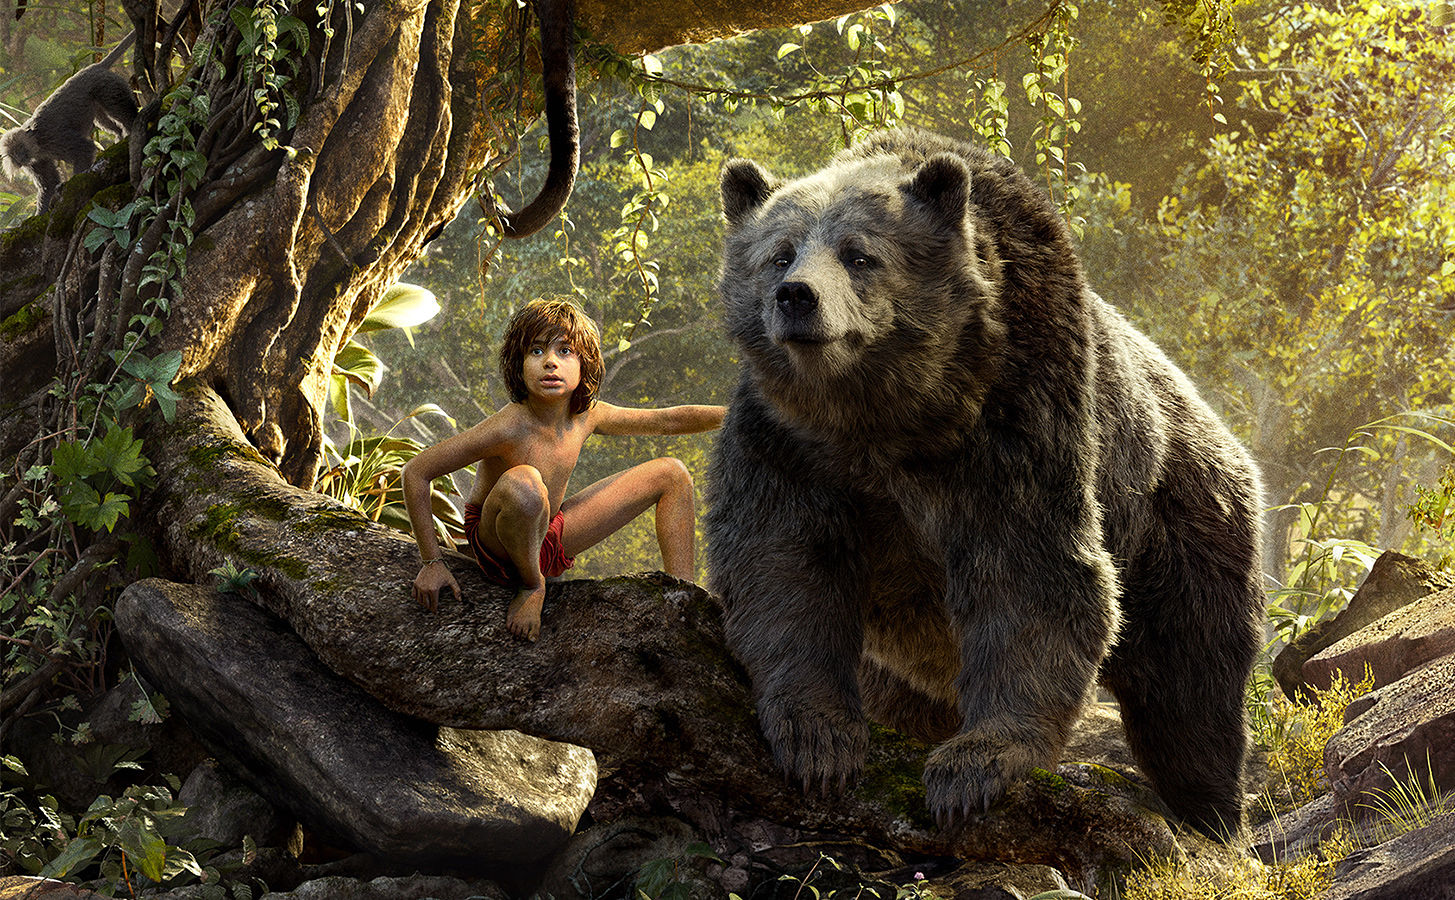 the-latest-poster-for-disney-s-the-jungle-book-finally-reveals-mowgli-bagheera-and-balo-781090.jpg